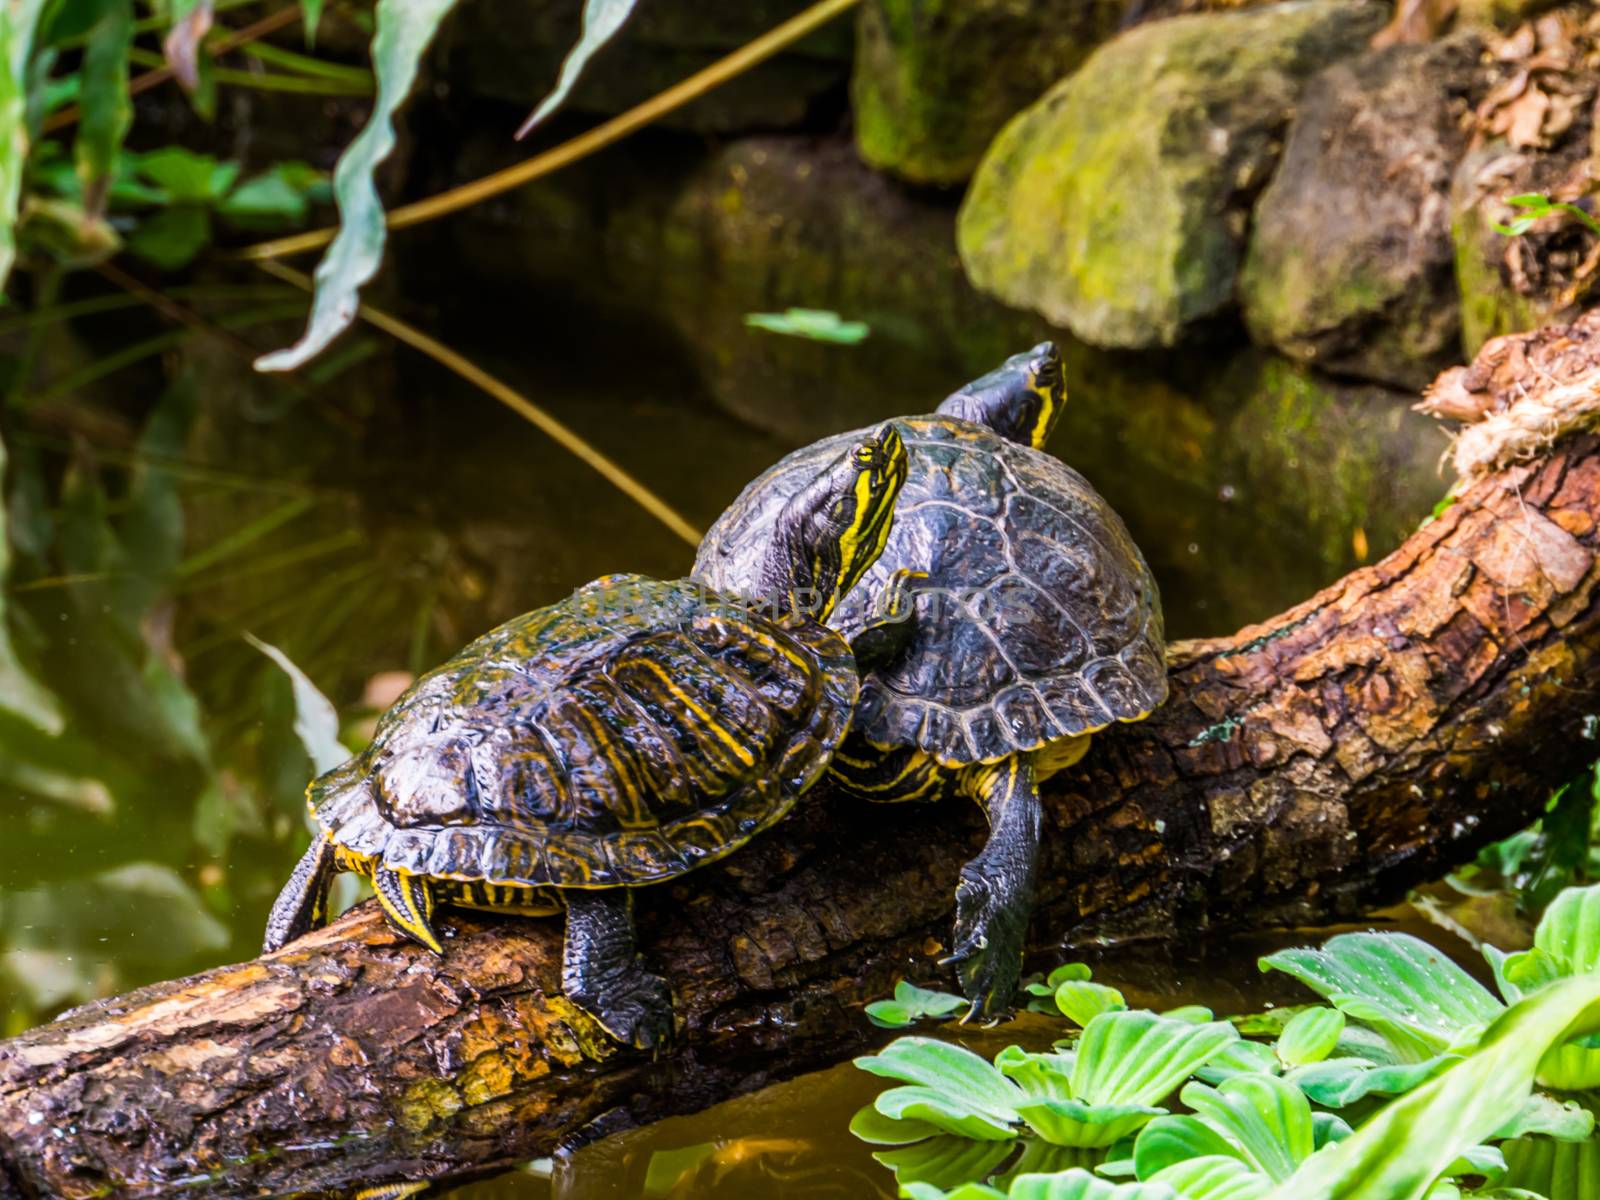 yellow bellied slider turtle couple at the water, popular tropical pets from America by charlottebleijenberg